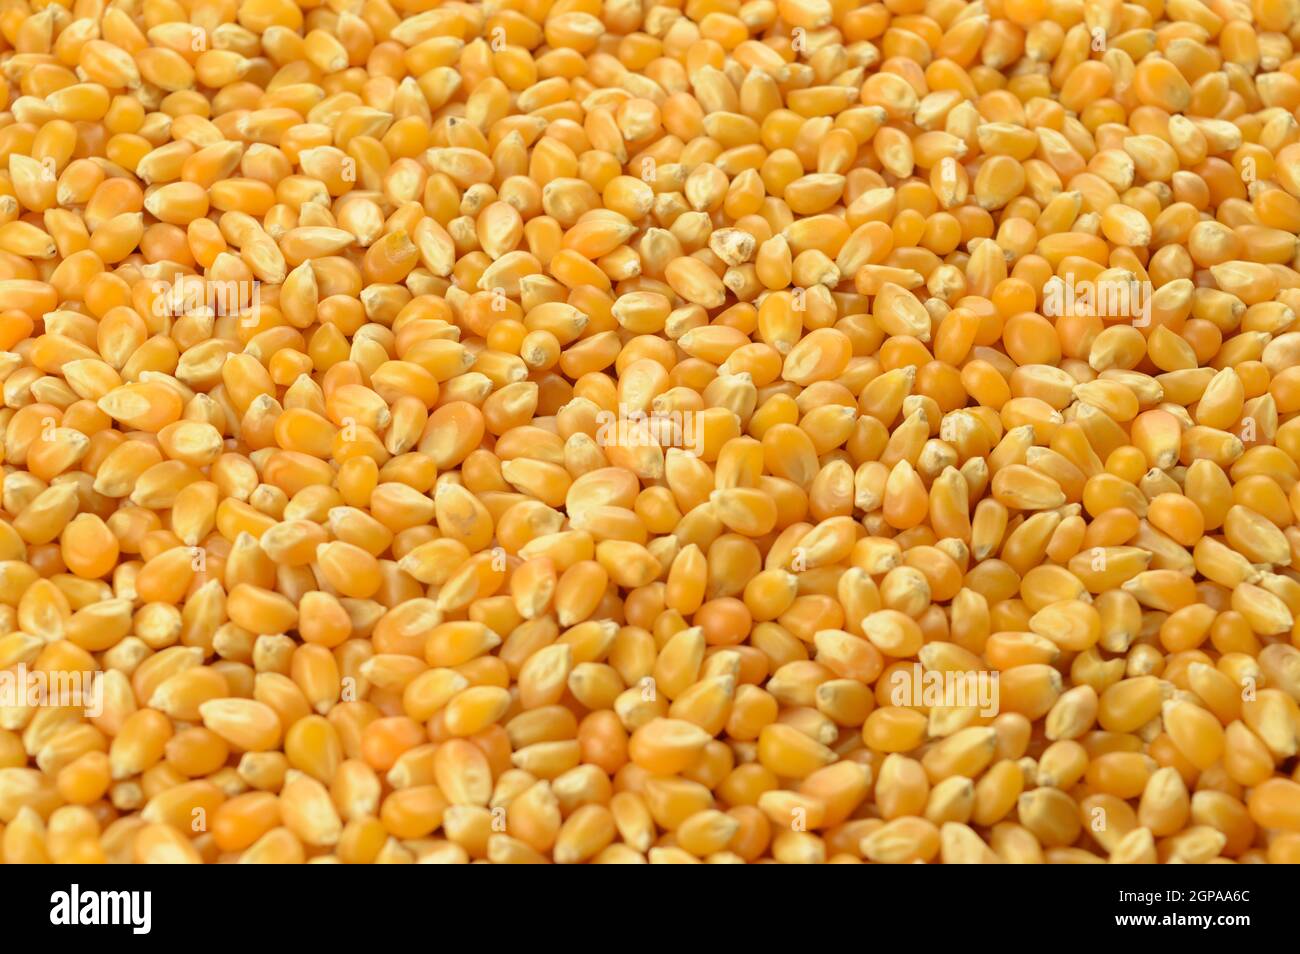 A closeup of whole kernel corn making a full frame background image. Stock Photo